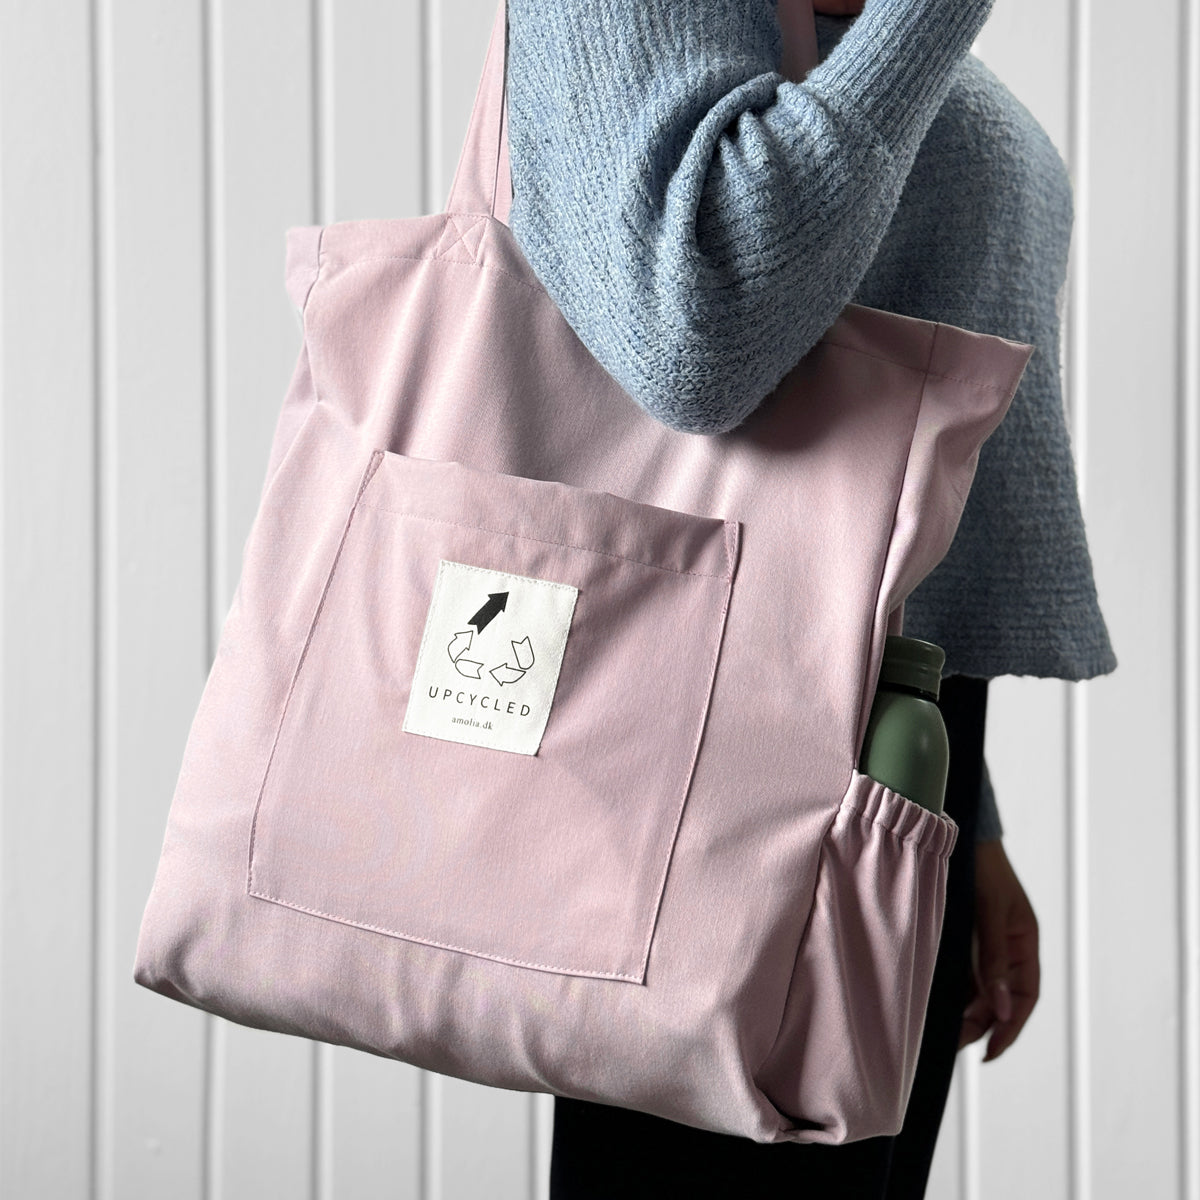 Upcycled tote bag with bottle holder, pastel pink